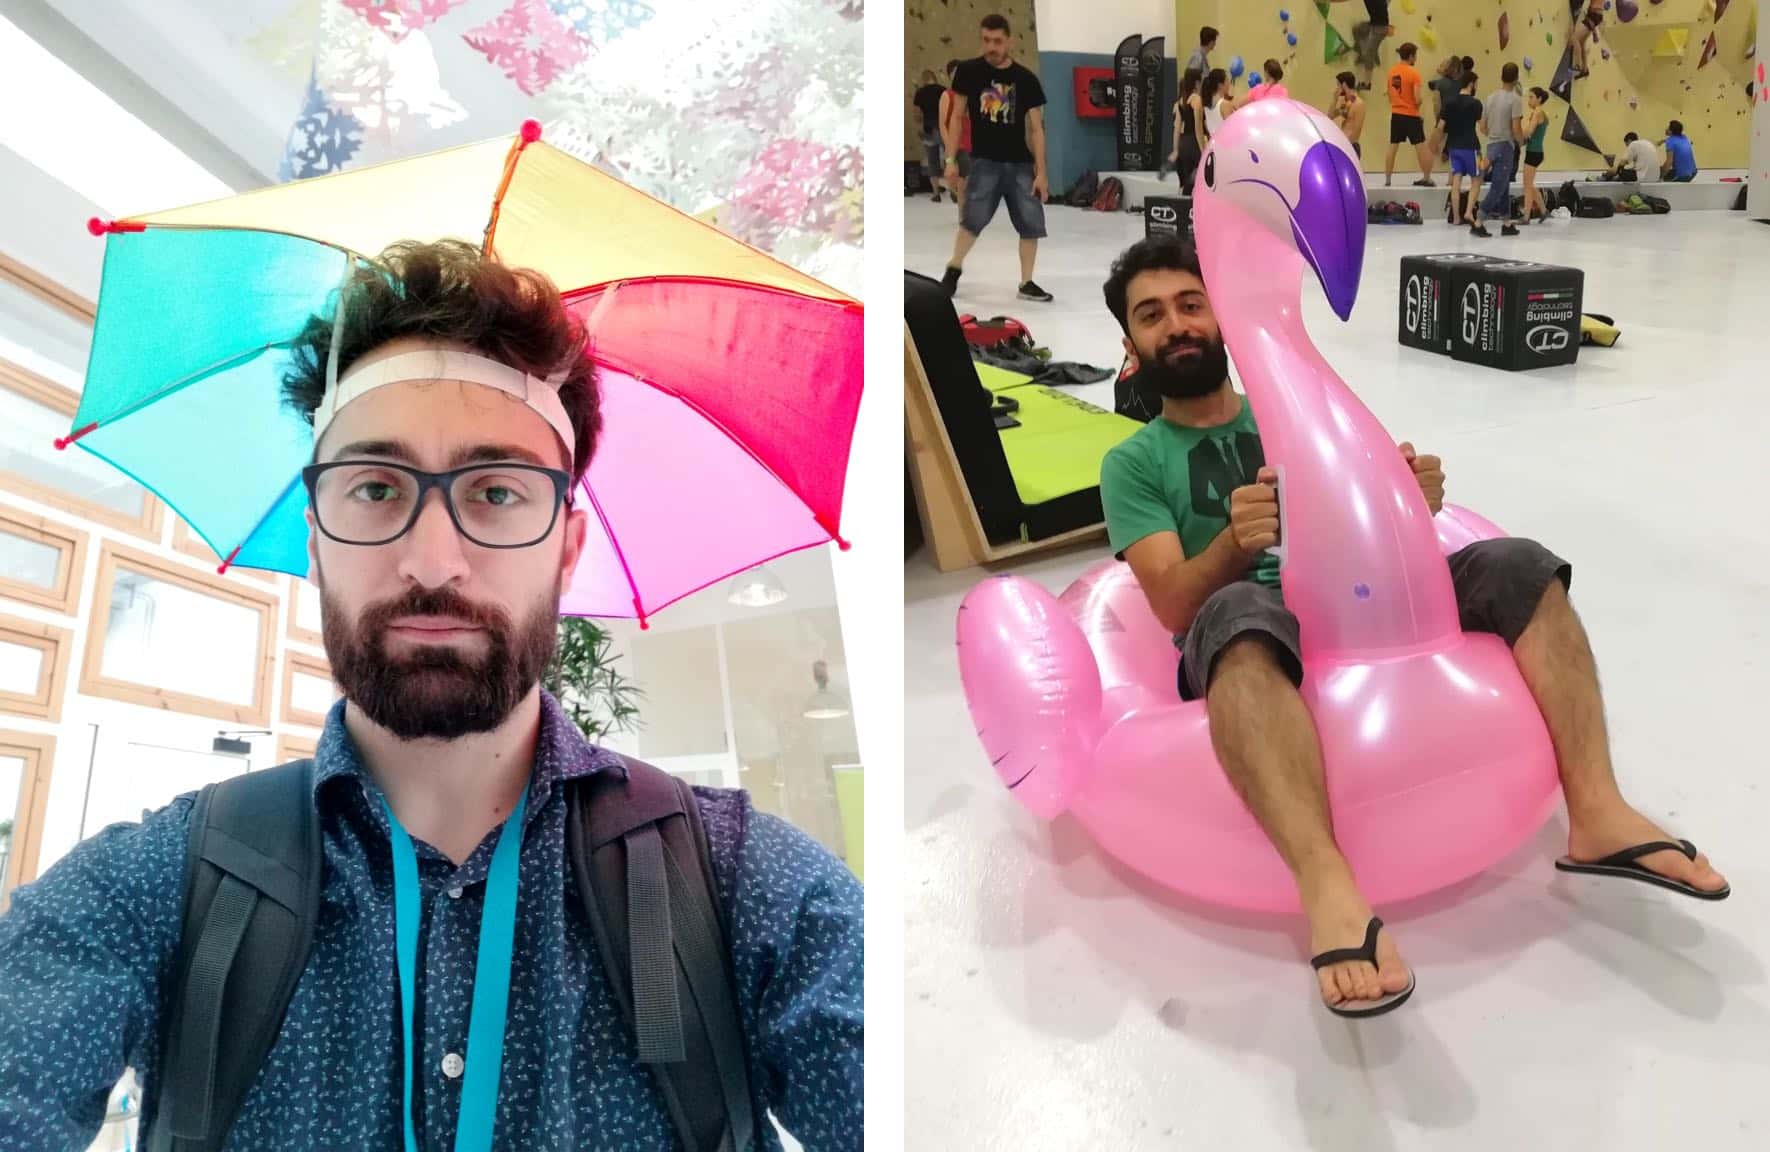 There are two photos. On the left side there is Antonio taking a selfie with a colorful umbrella hat. On the right side, Antonio is sitting on an inflatable Flamingo.